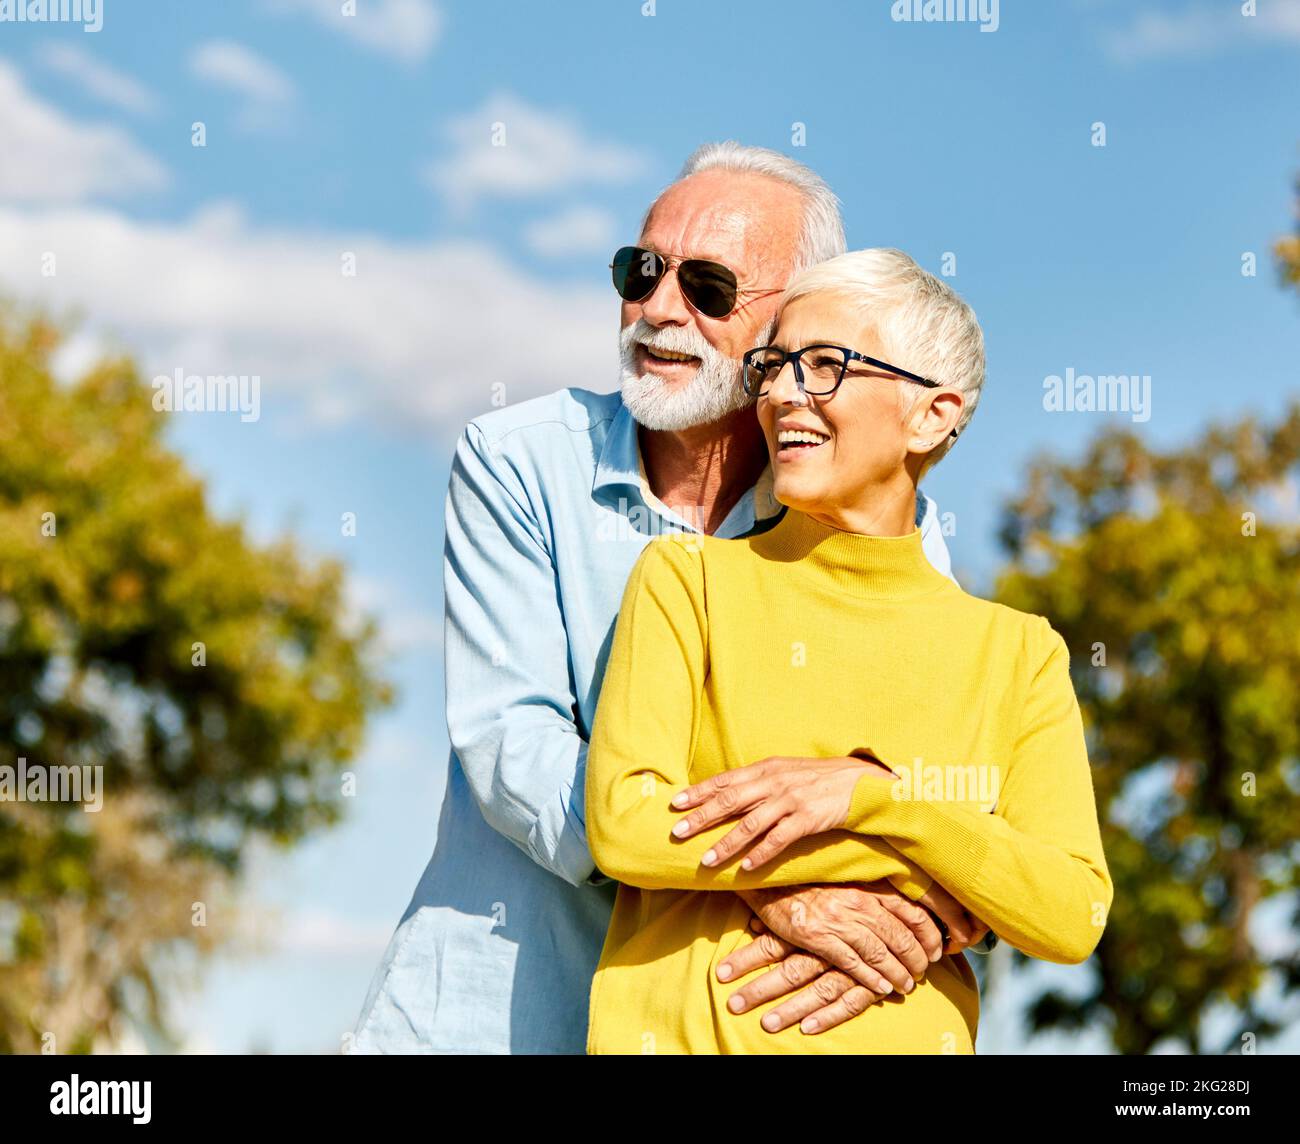 woman man outdoor senior couple happy lifestyle retirement together smiling love hug nature mature Stock Photo